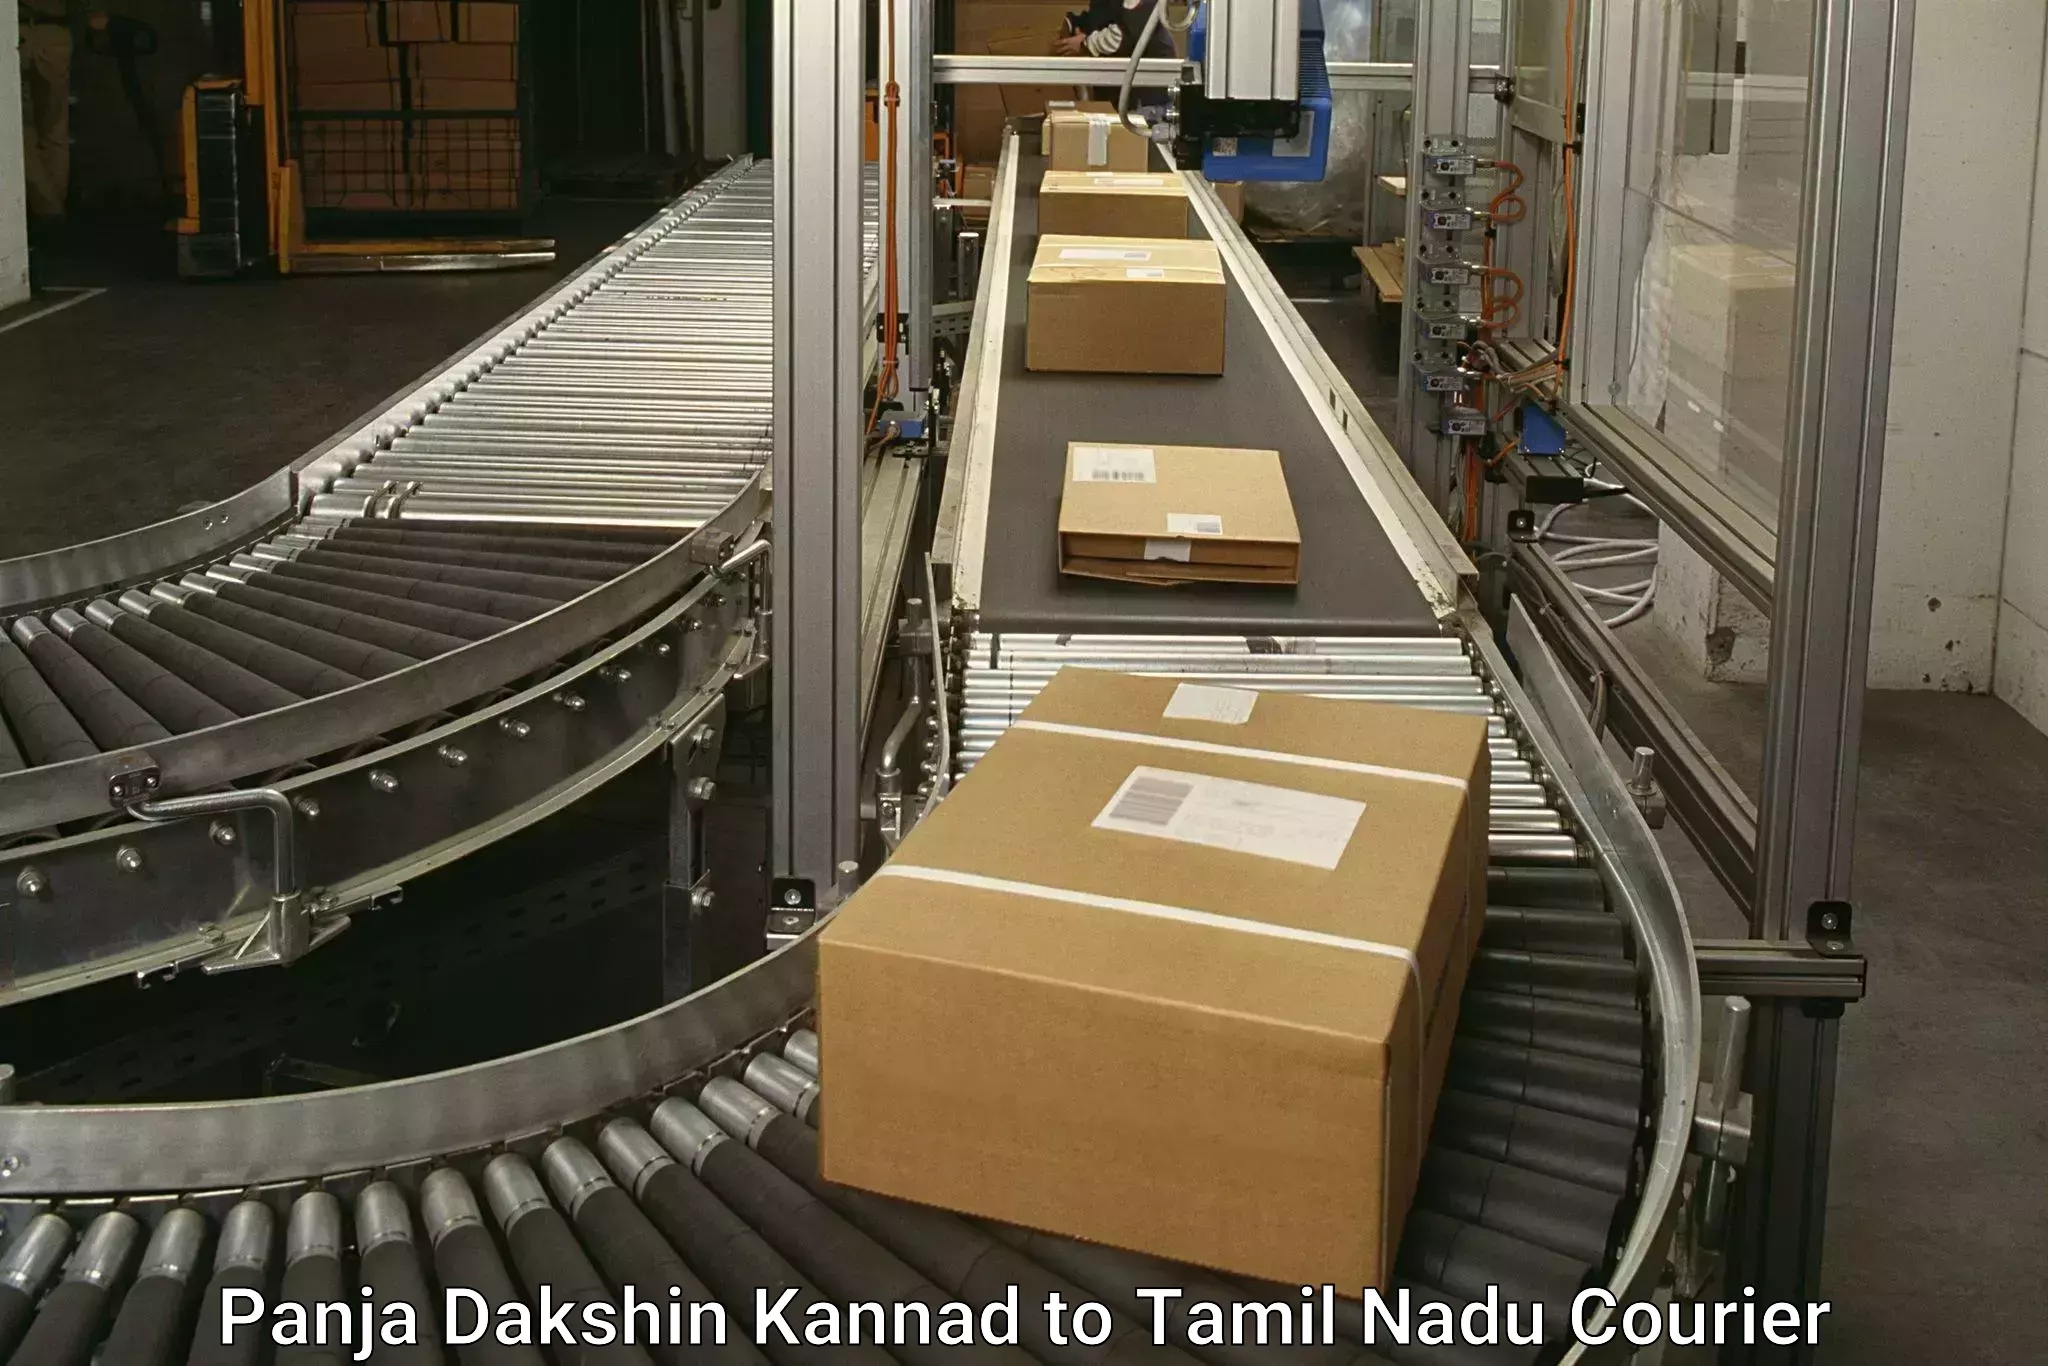 Overnight delivery services Panja Dakshin Kannad to Ennore Port Chennai